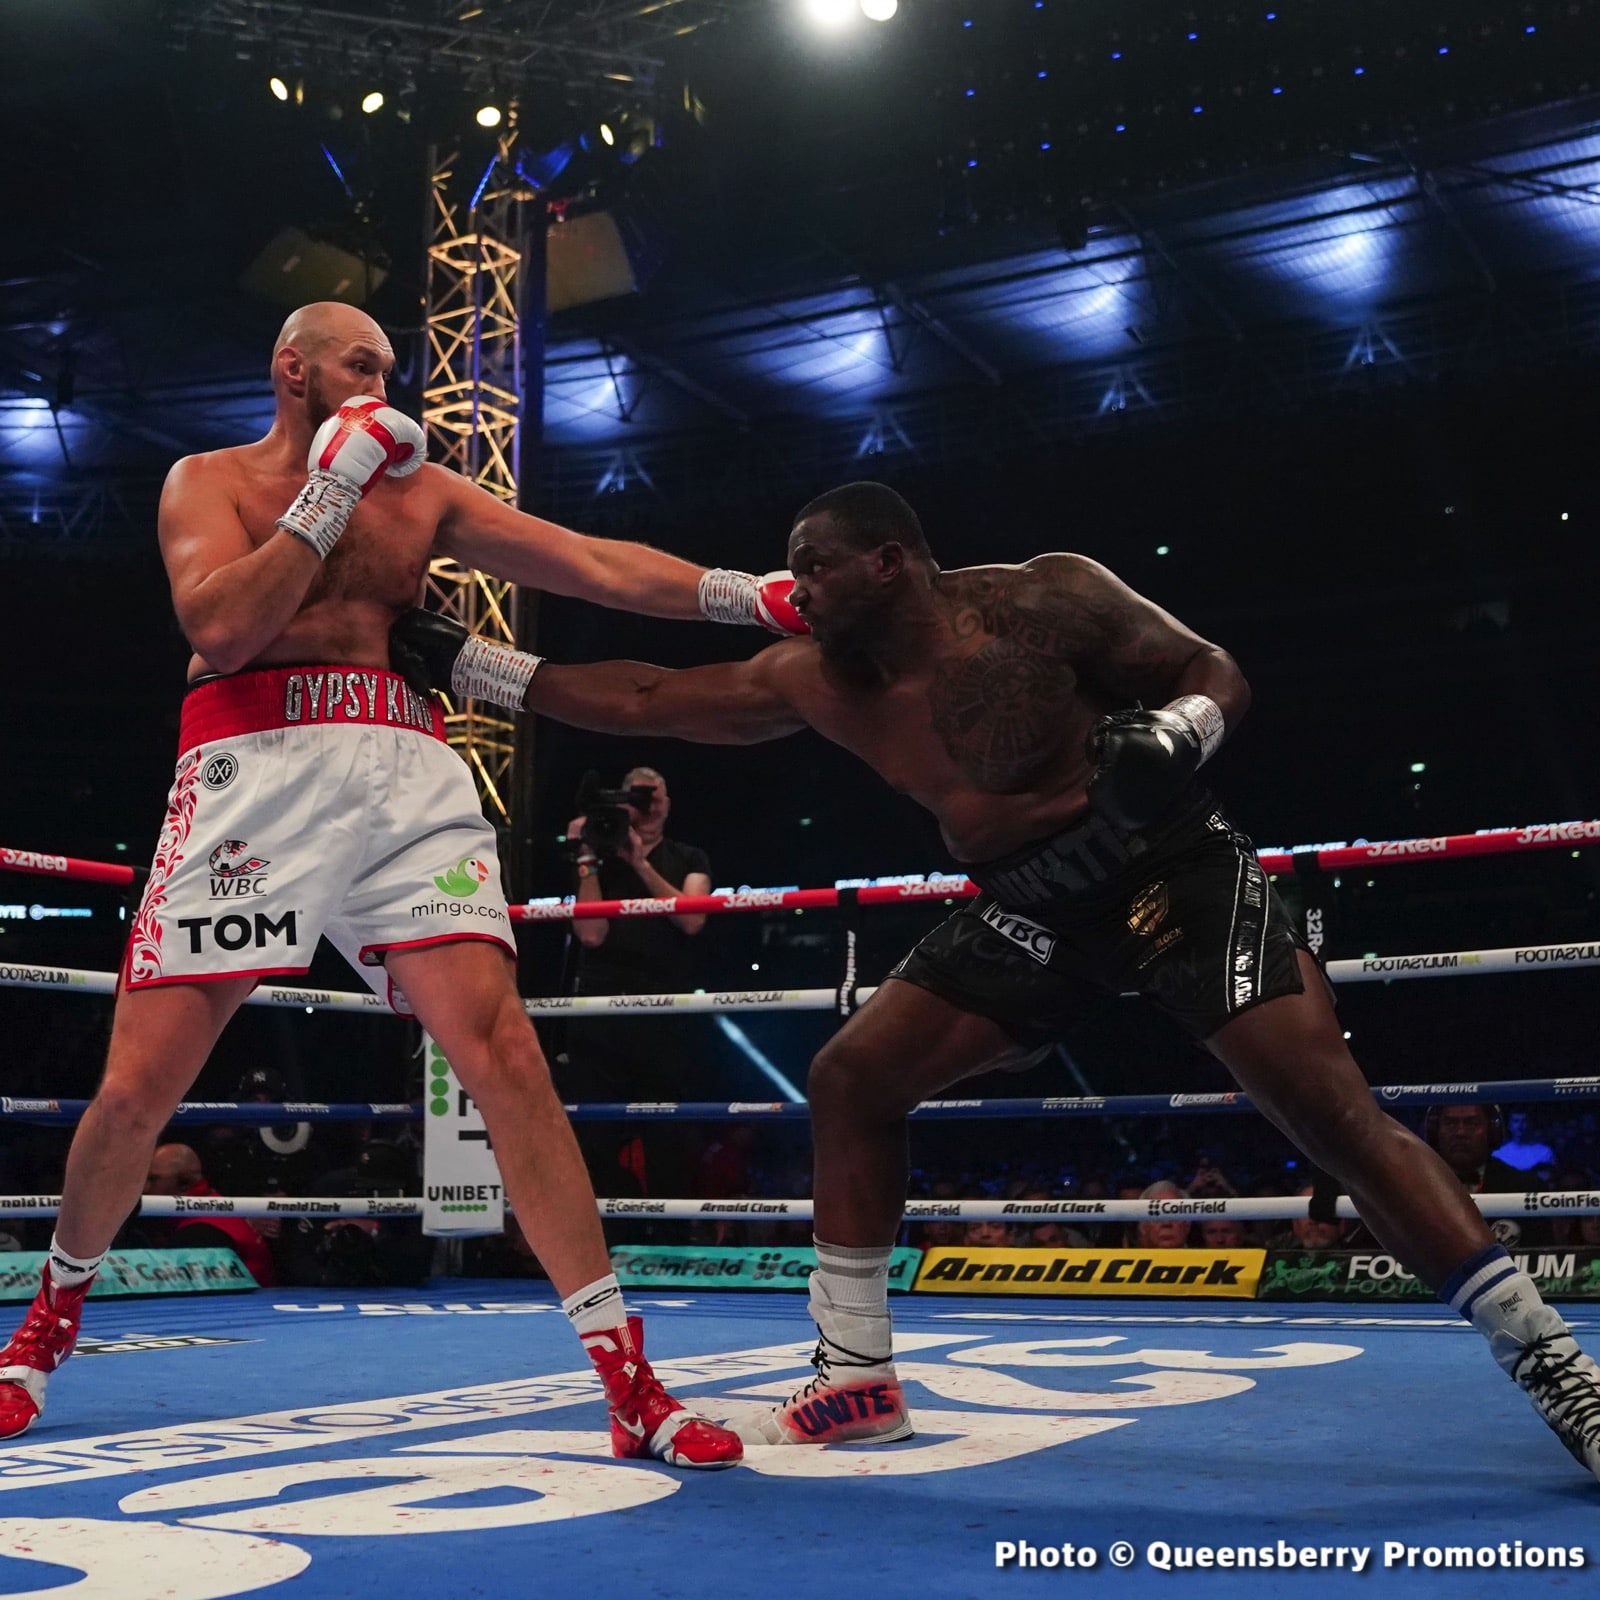 Tyson Fury vs. Dillian Whyte - LIVE action results from London